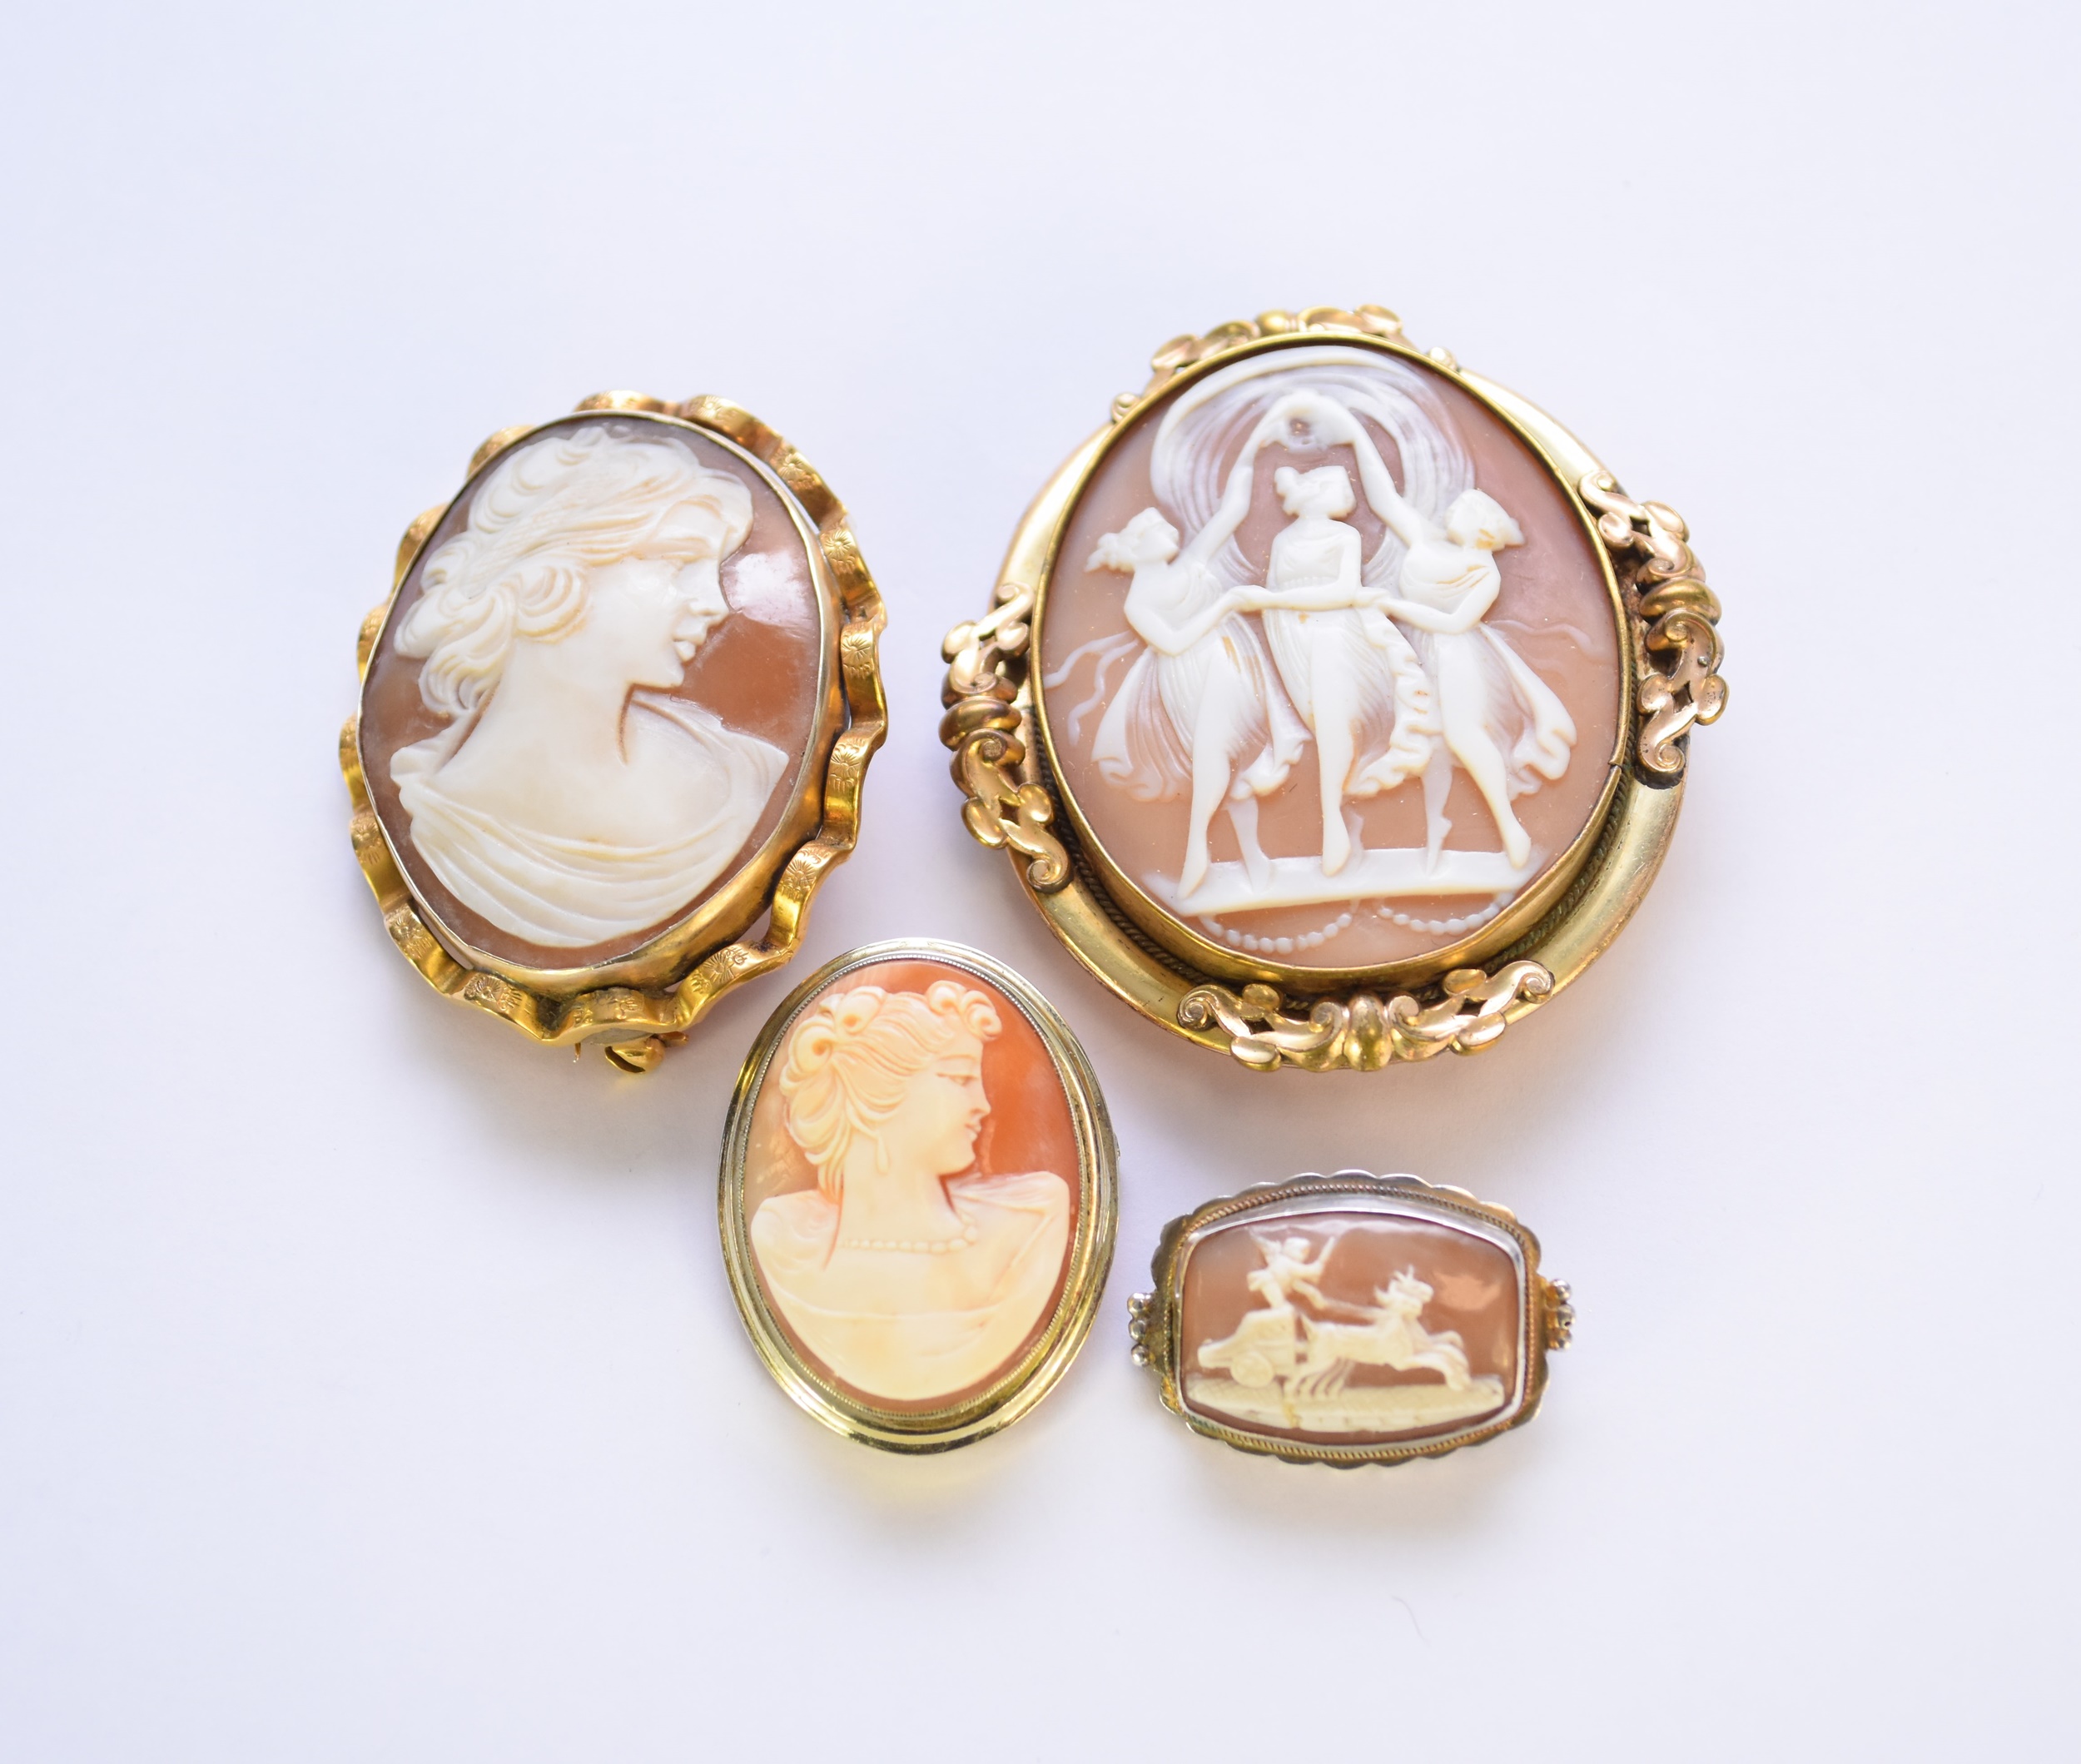 A collection of four cameo brooches